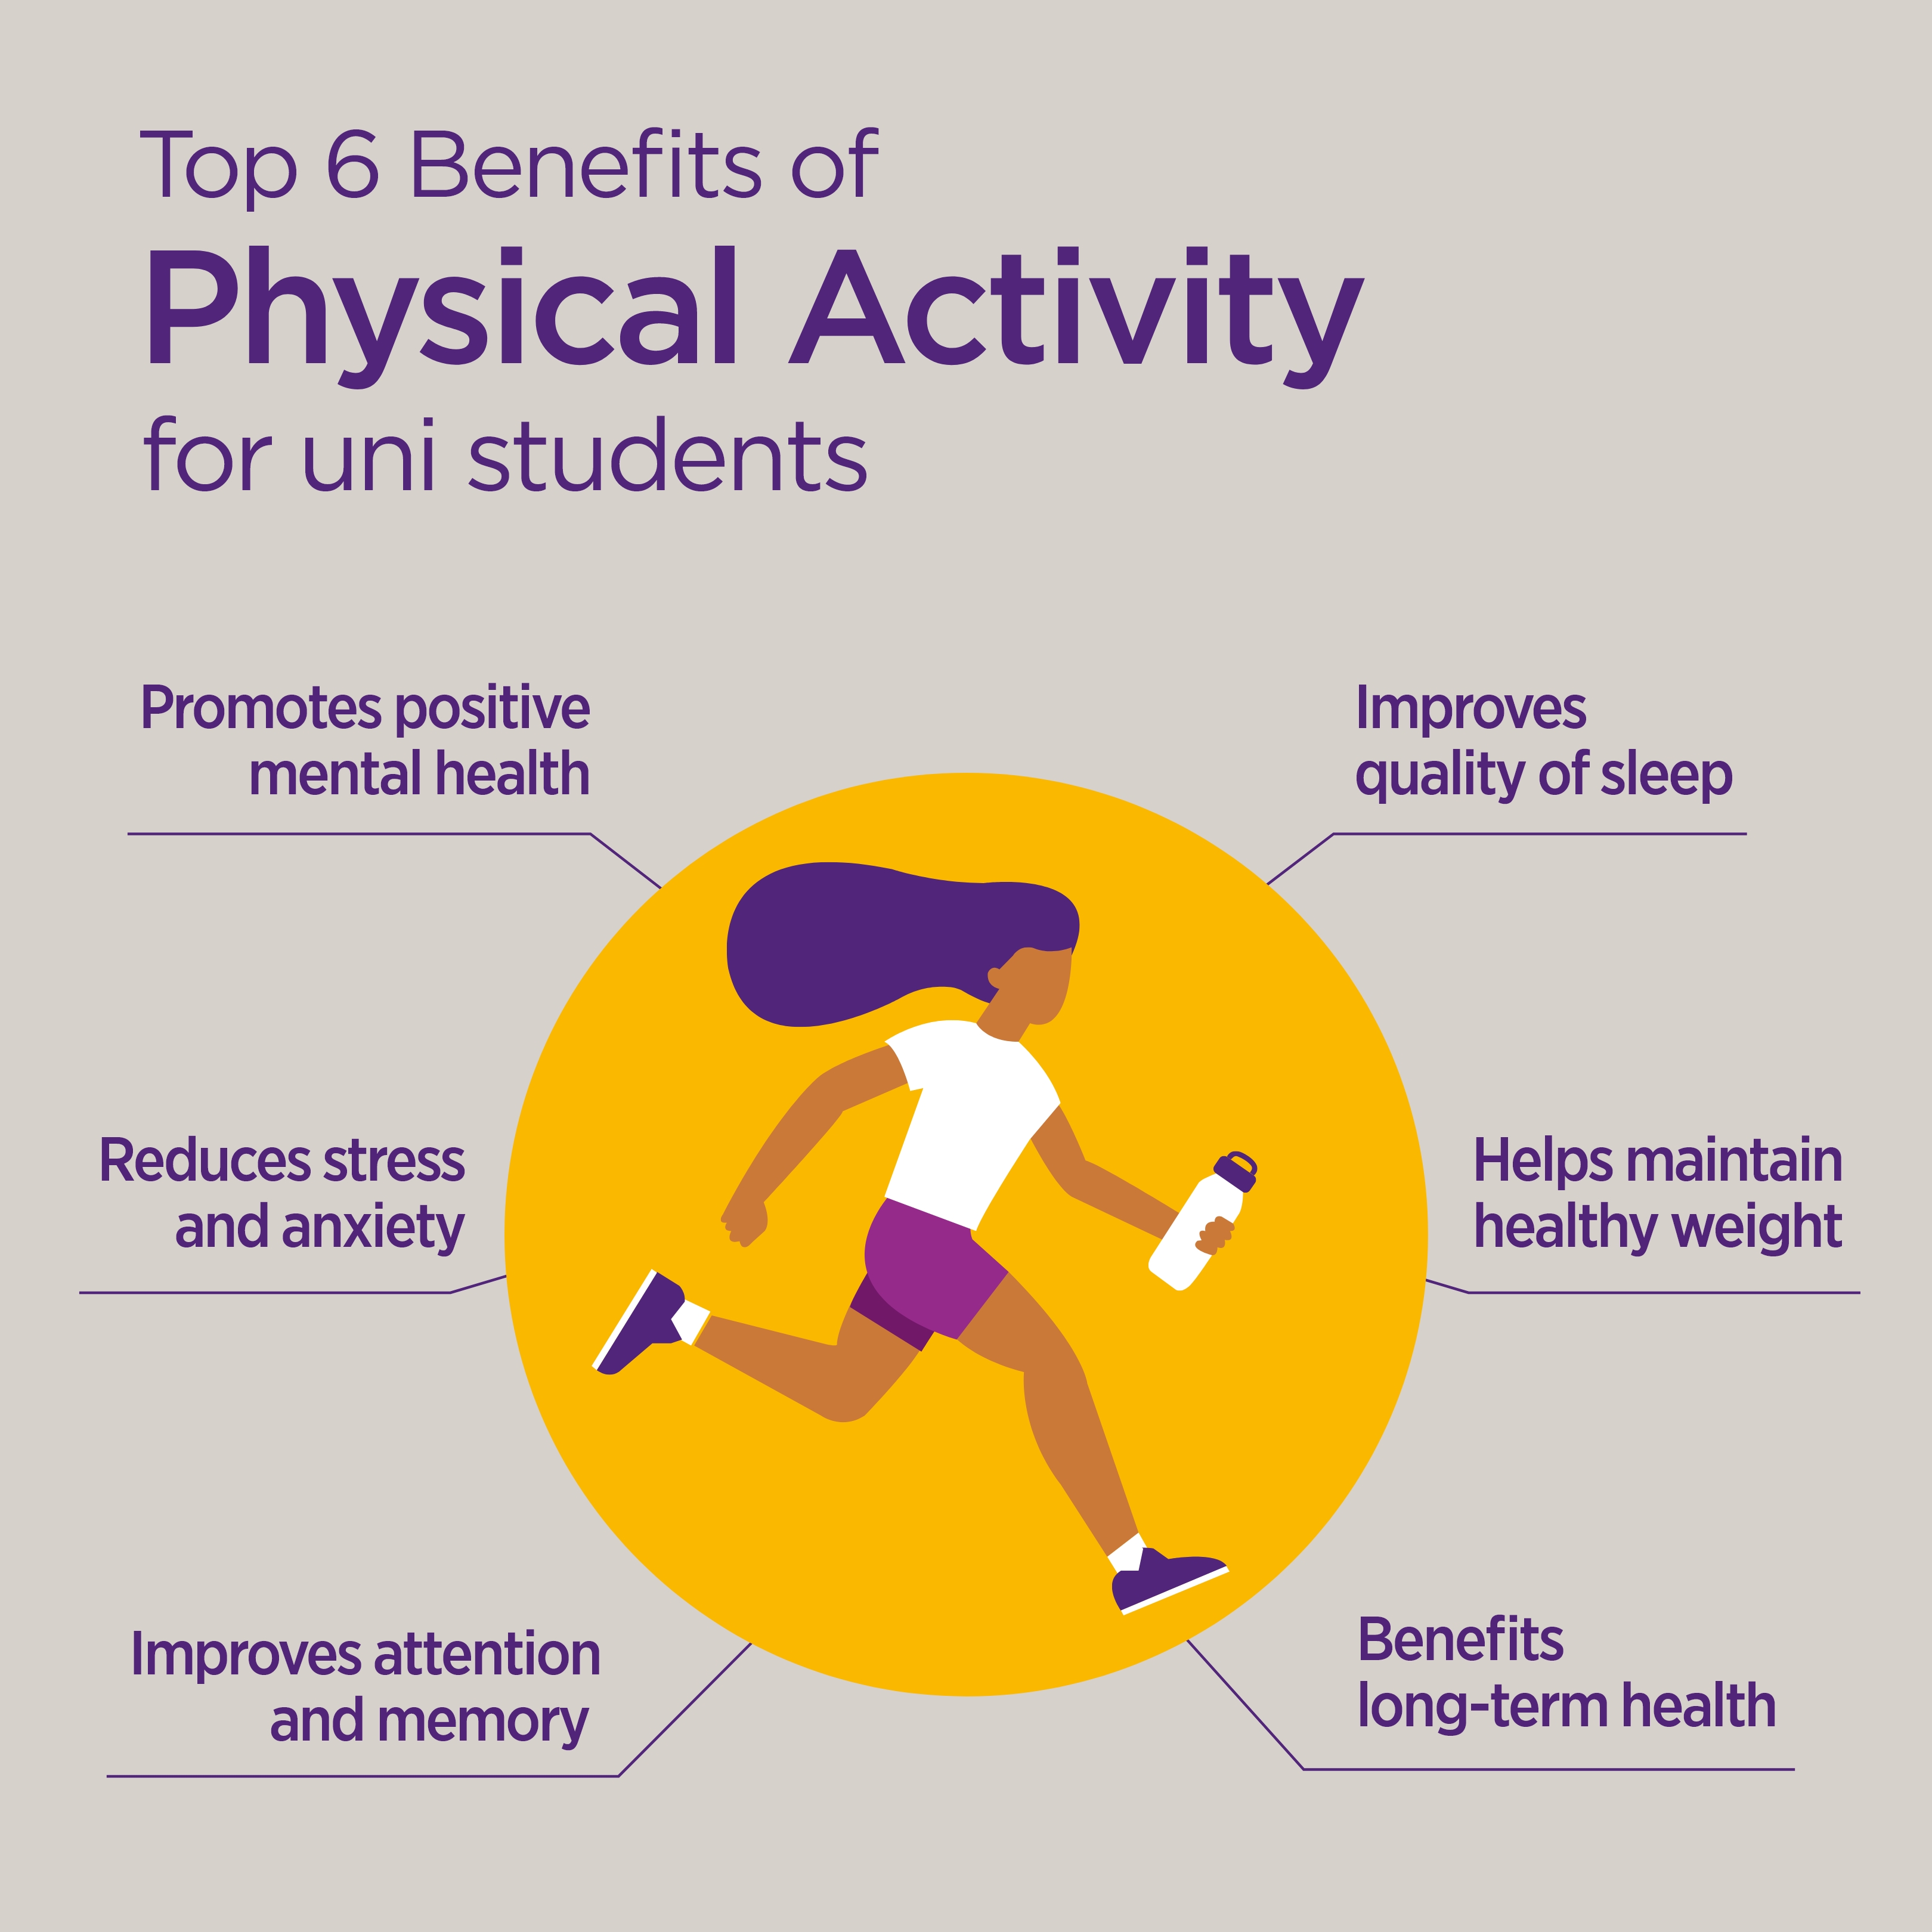 health education on physical activities